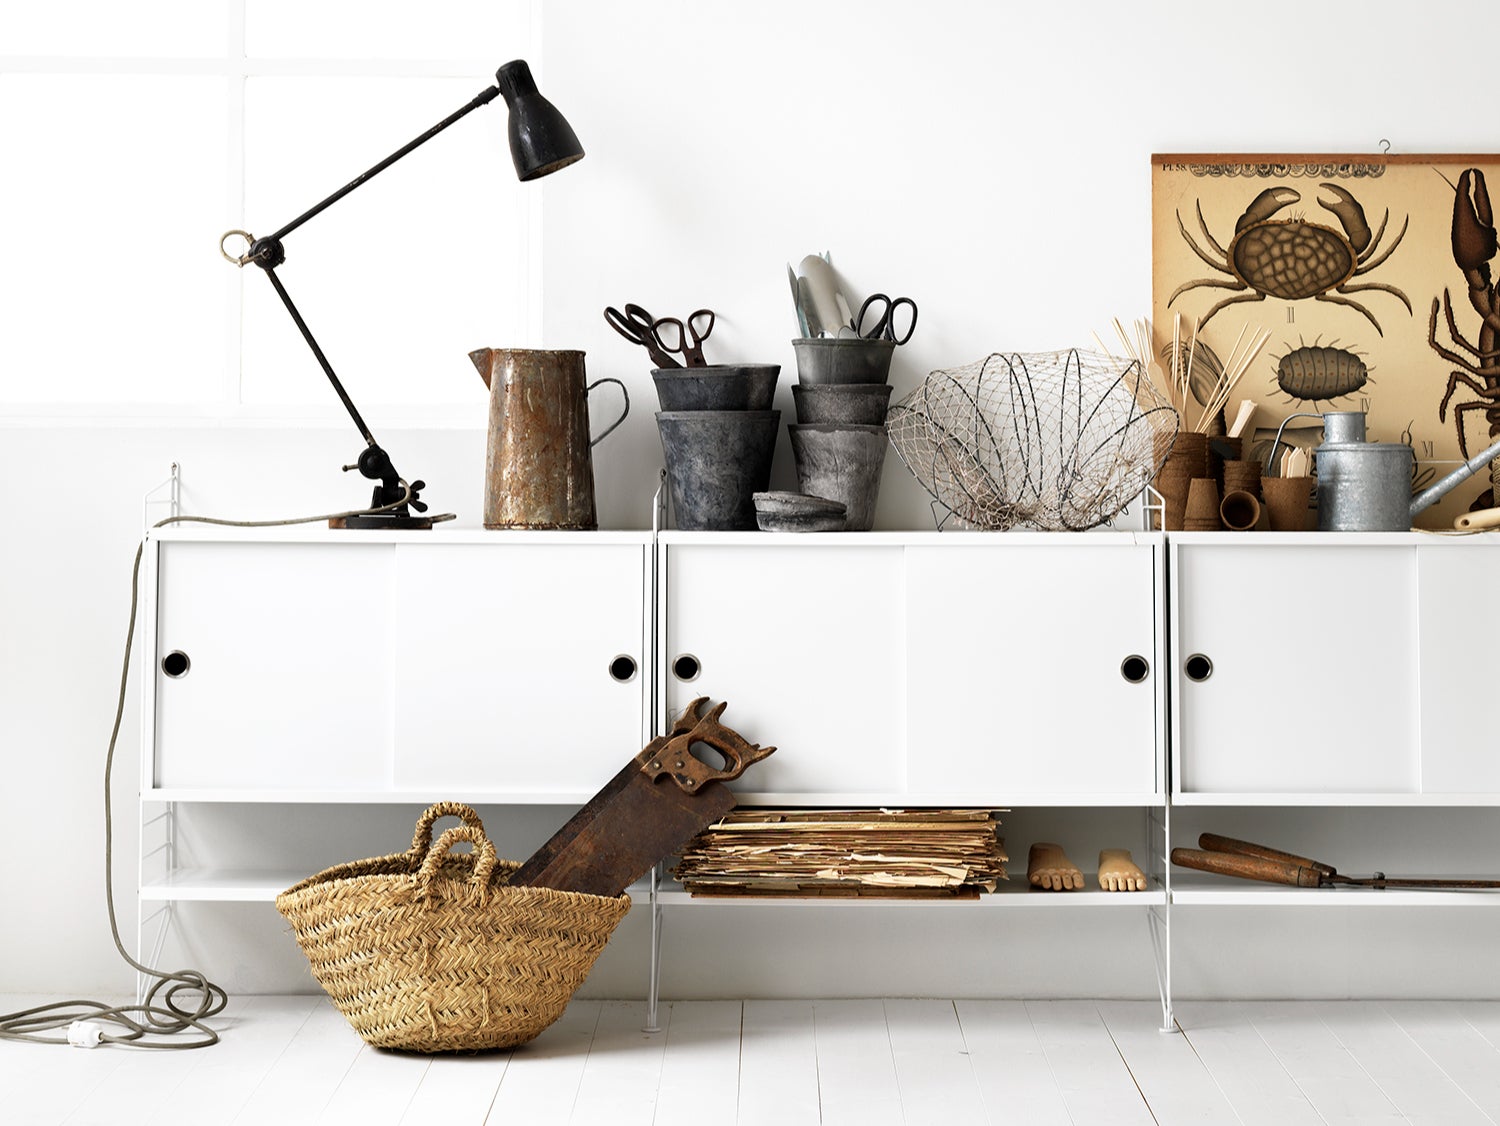 String shelving makes a subtle design statement without distracting from the flow of the room